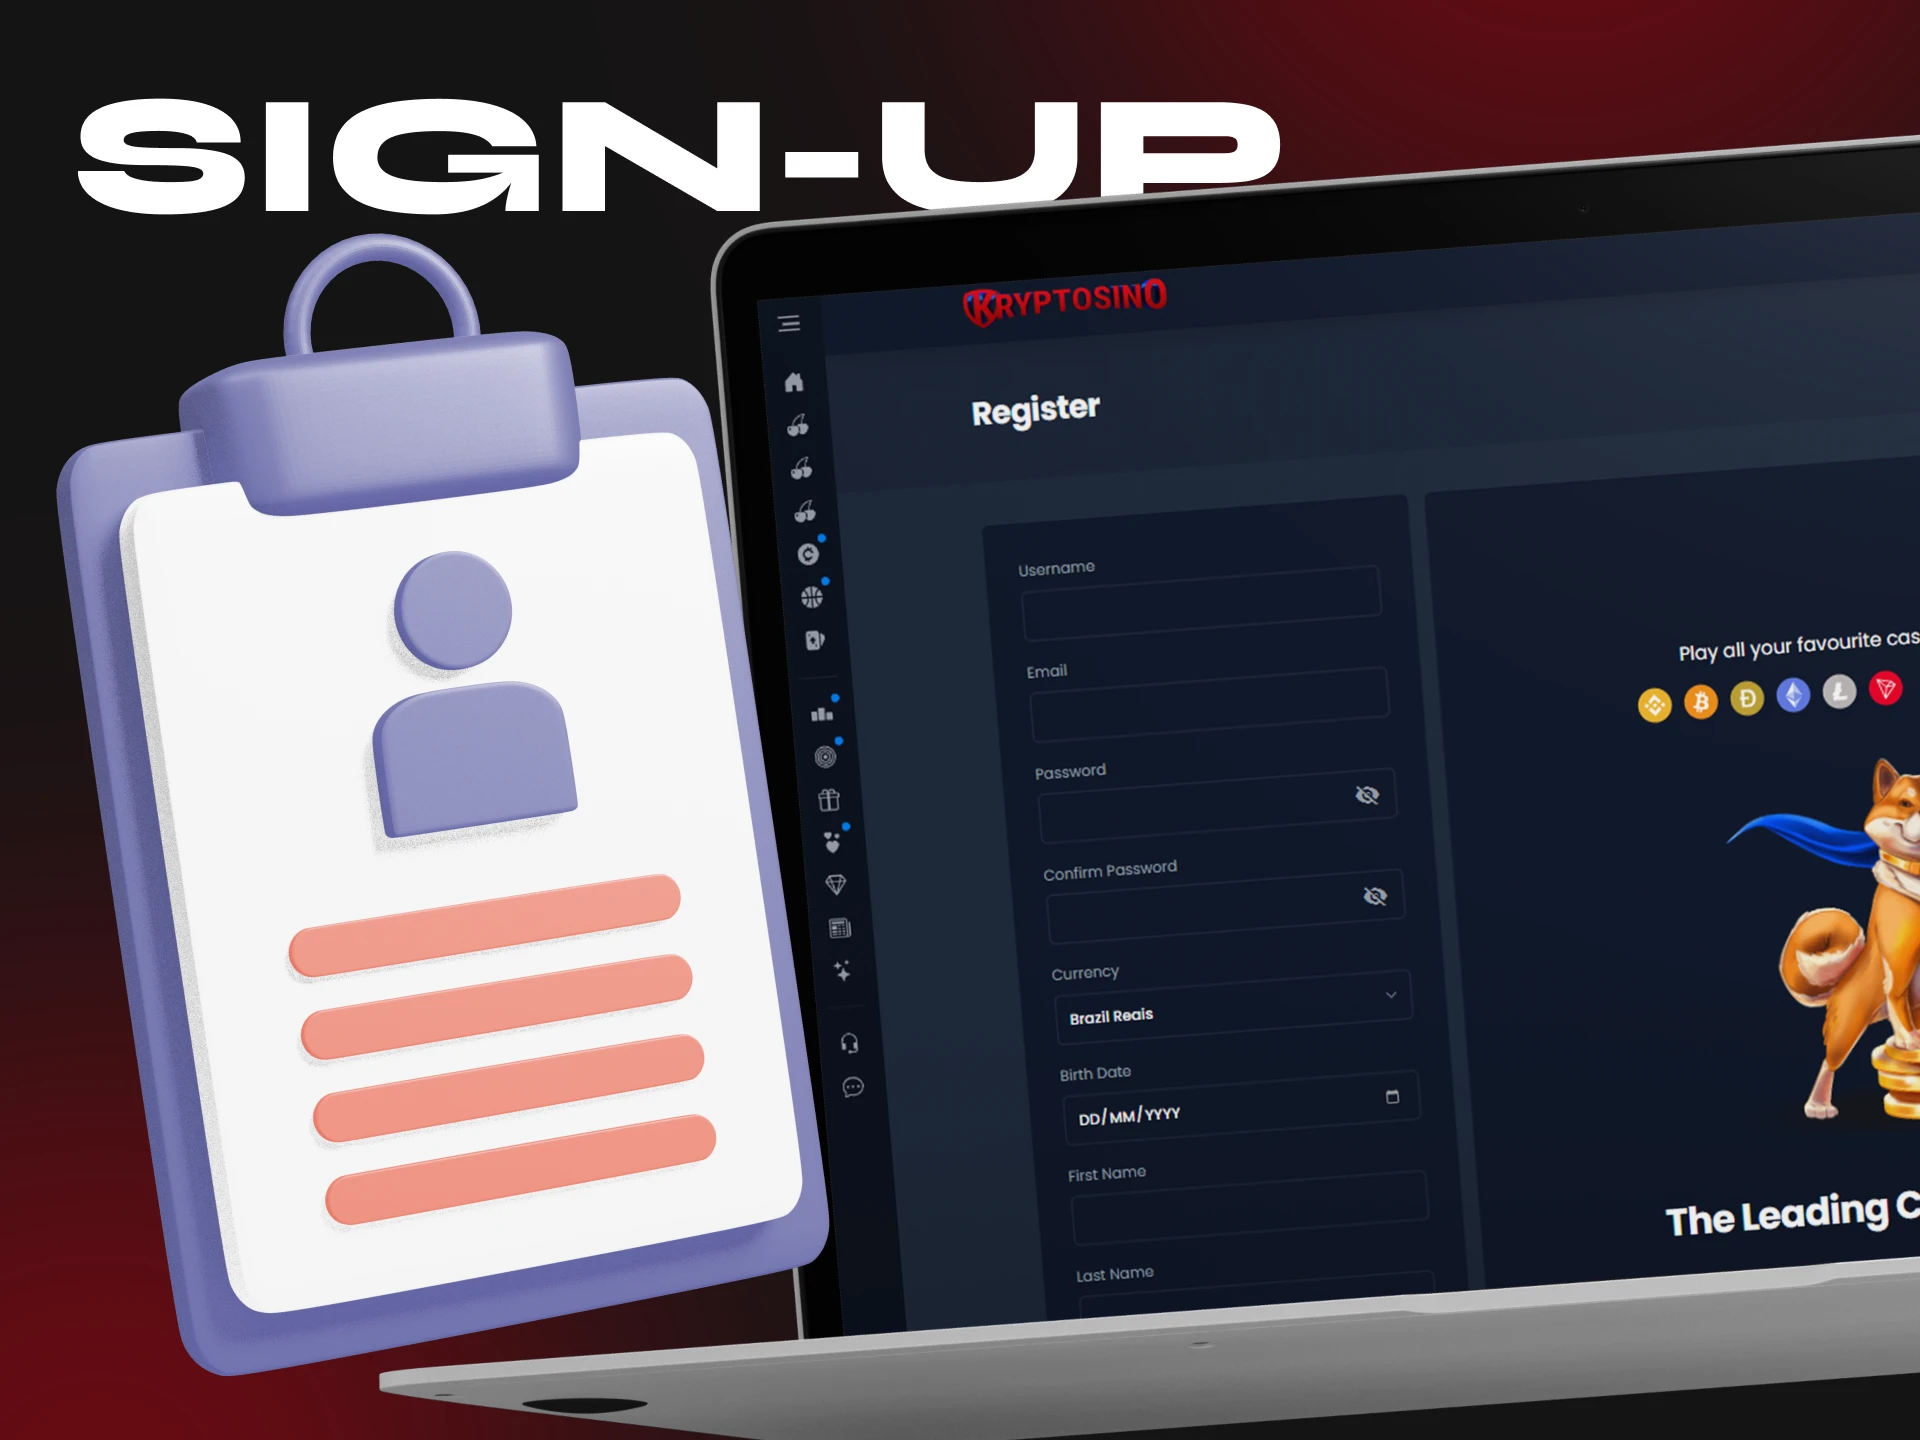 Registration at the Kryptosino casino is quick and easy.